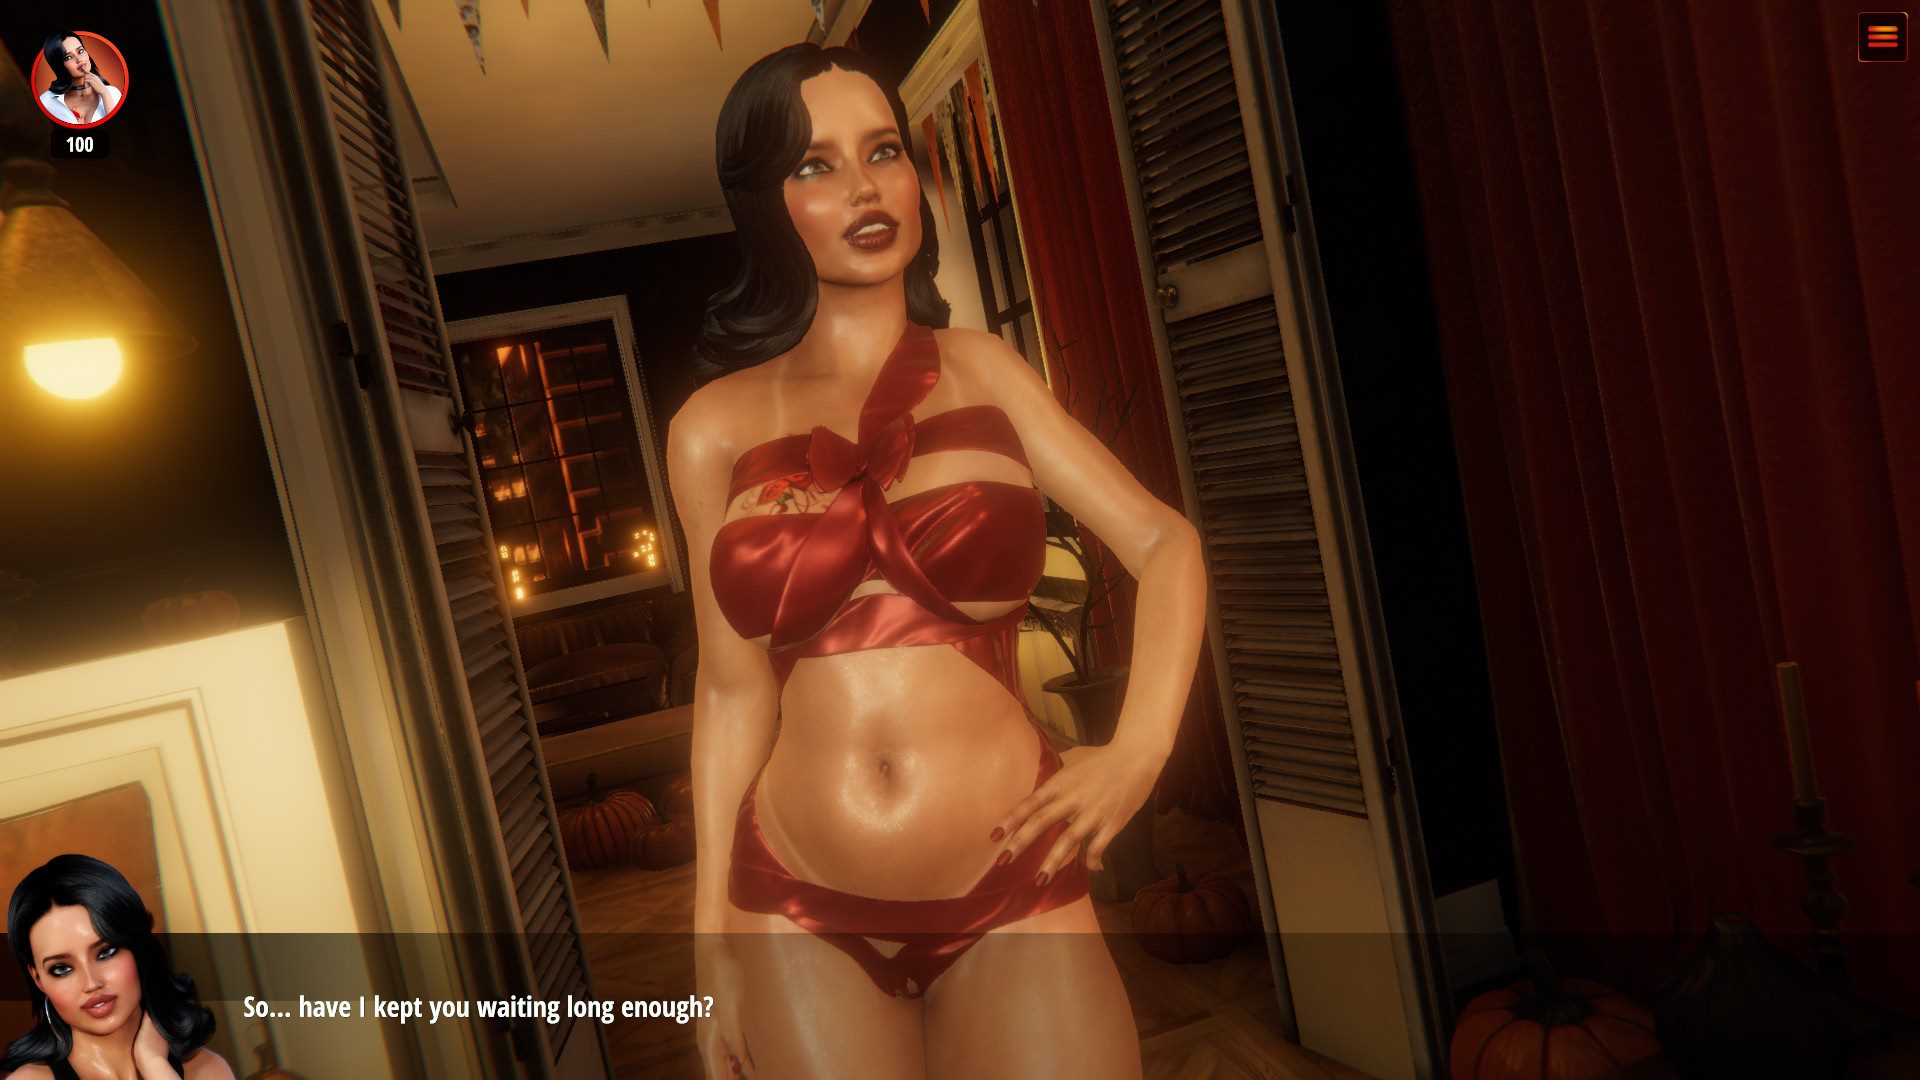 Halloween with Veronica Unity Porn Sex Game v.1.0.1 Download for Windows